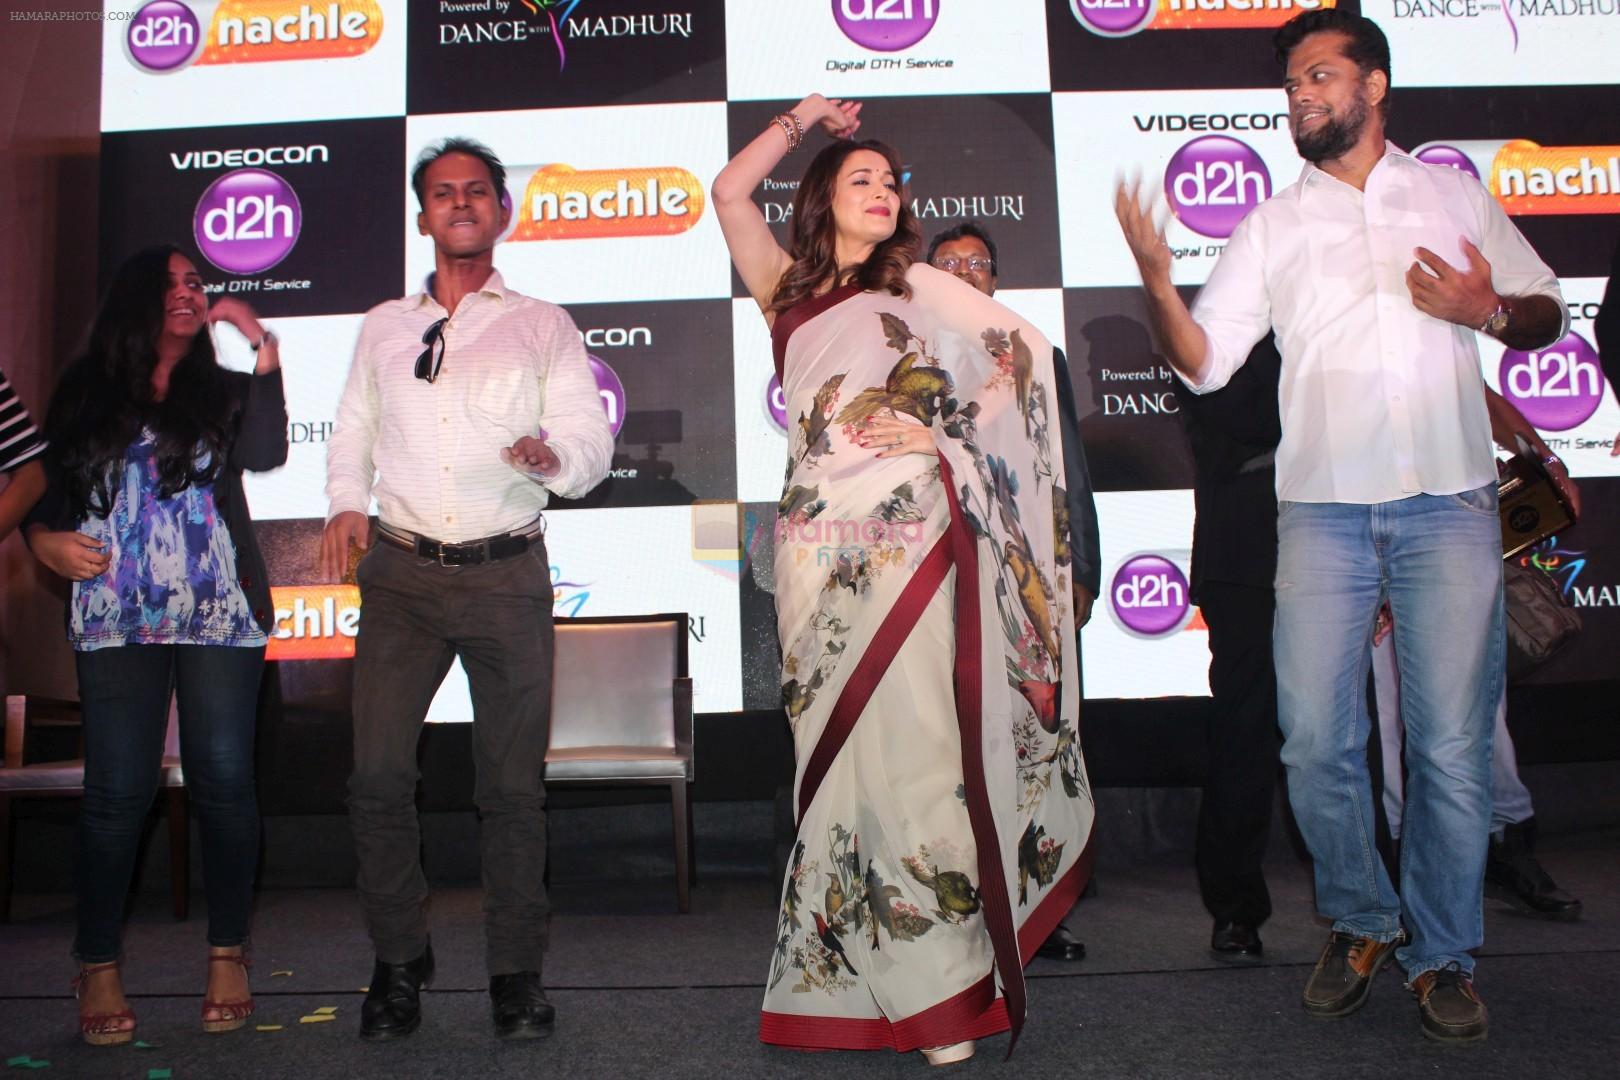 Madhuri Dixit at Videocon D2h Launch Of New Channel on 10th May 2017